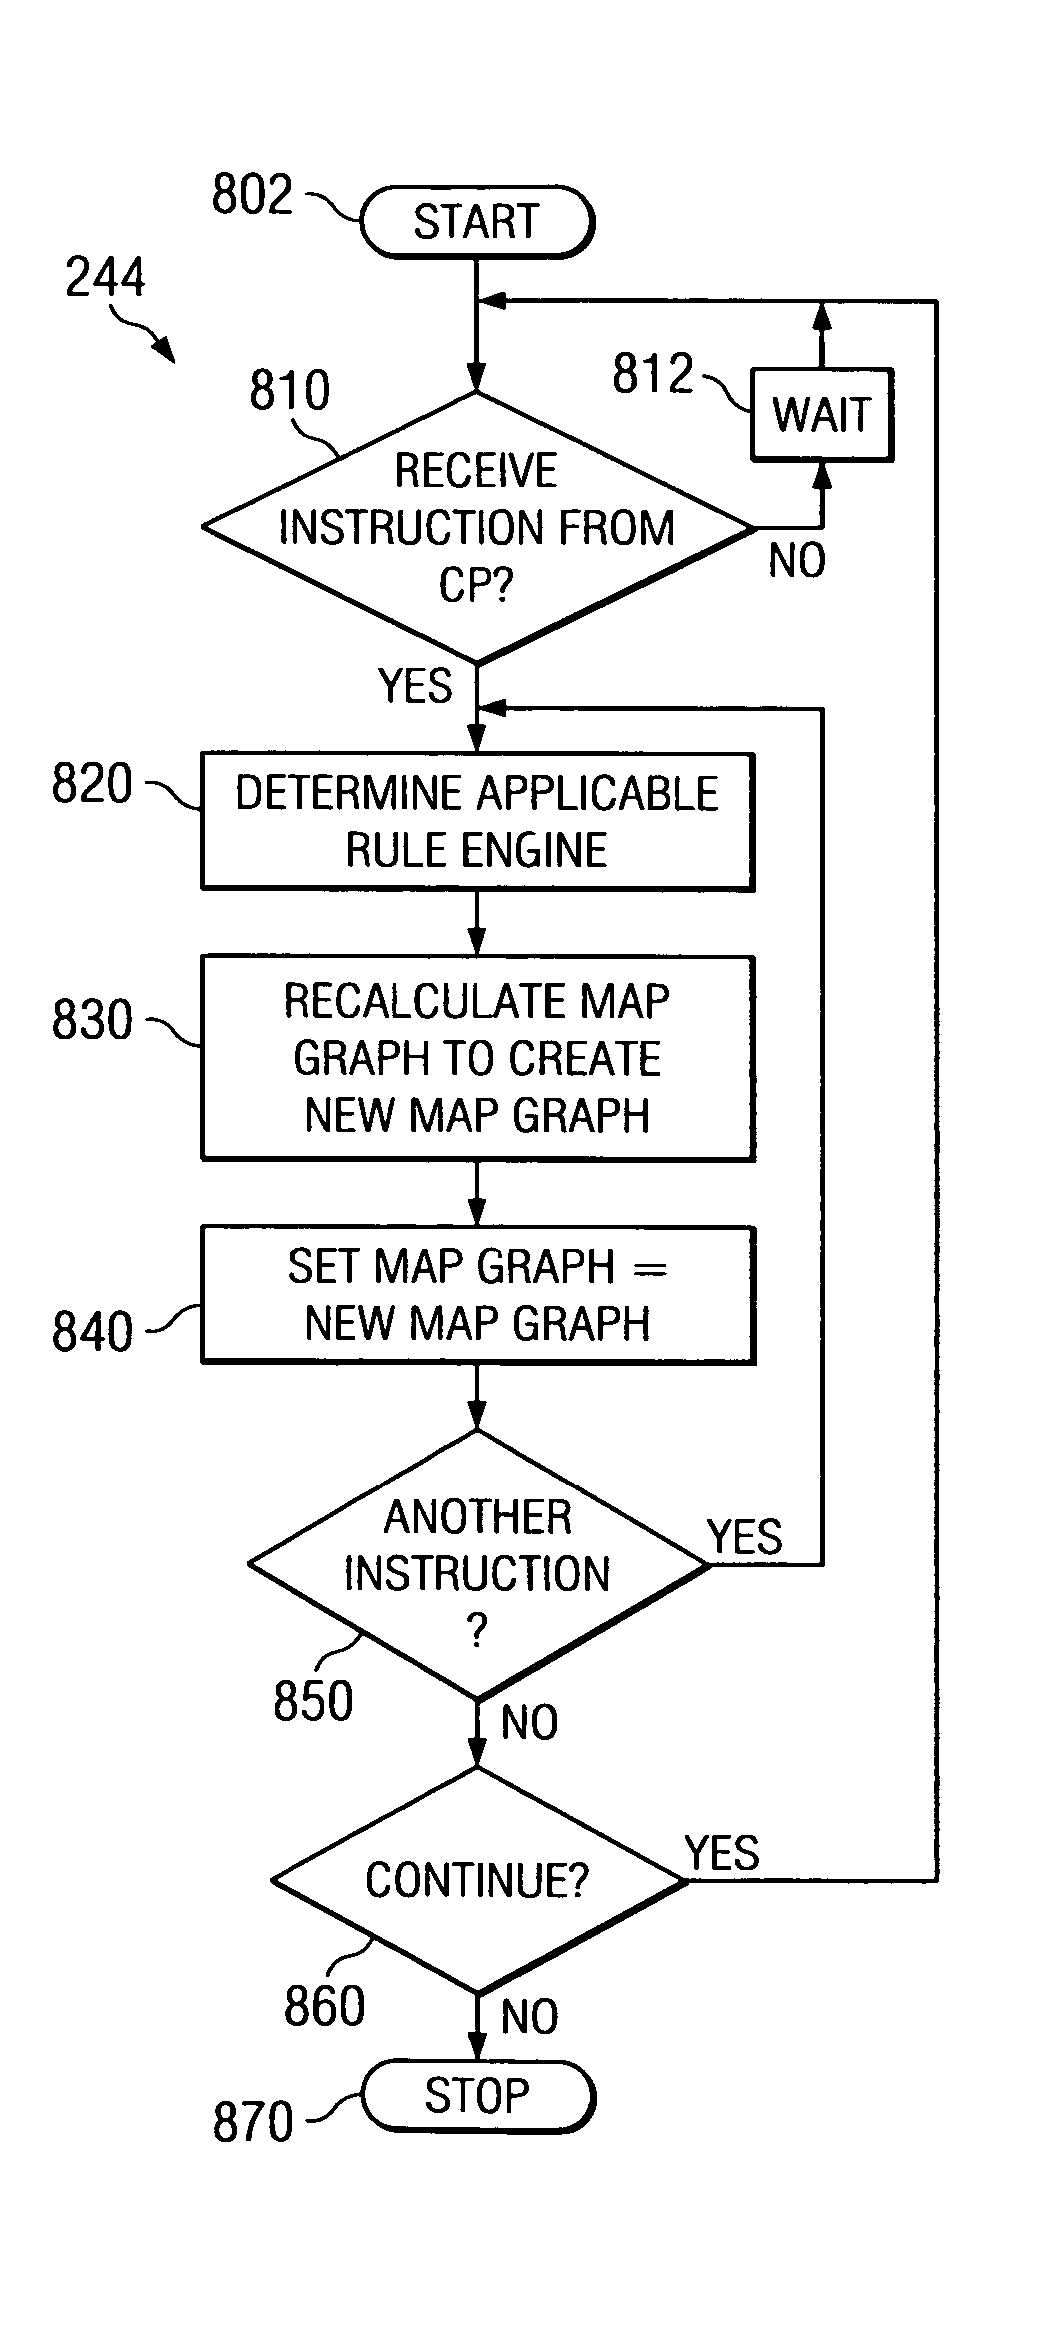 Method for distributing and geographically load balancing location aware communication device client-proxy applications